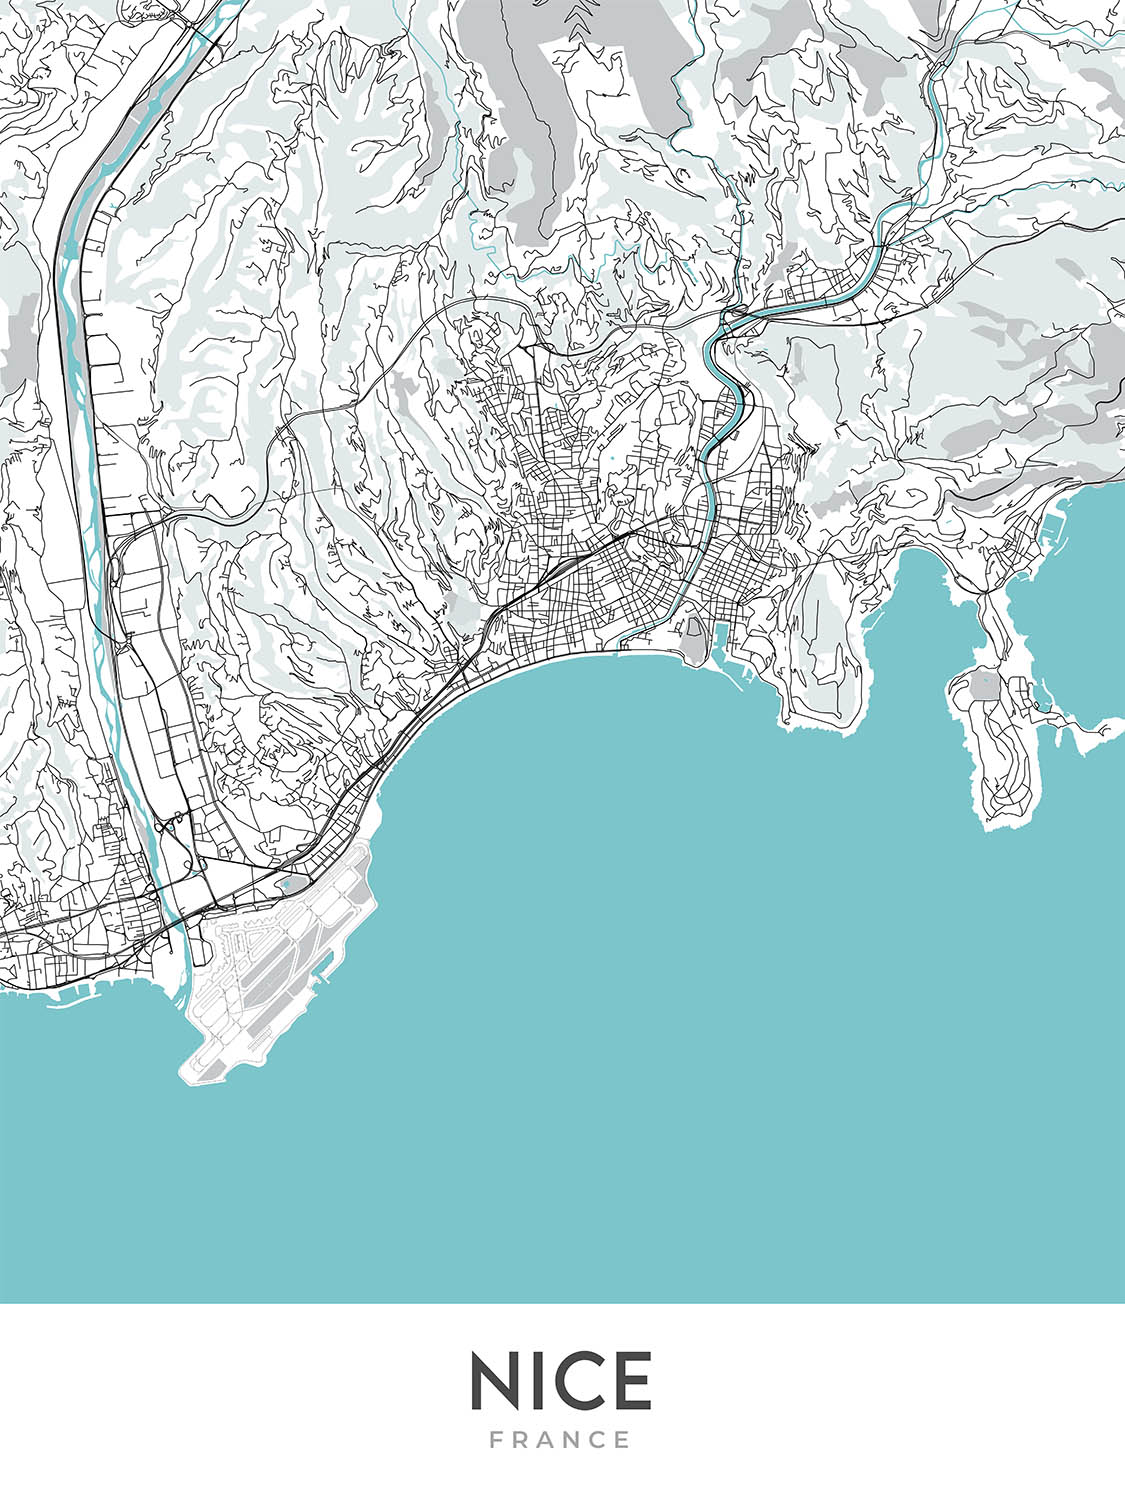 Modern City Map of Nice, France: Old Town, Castle Hill, Promenade des Anglais, Port, Cathedral